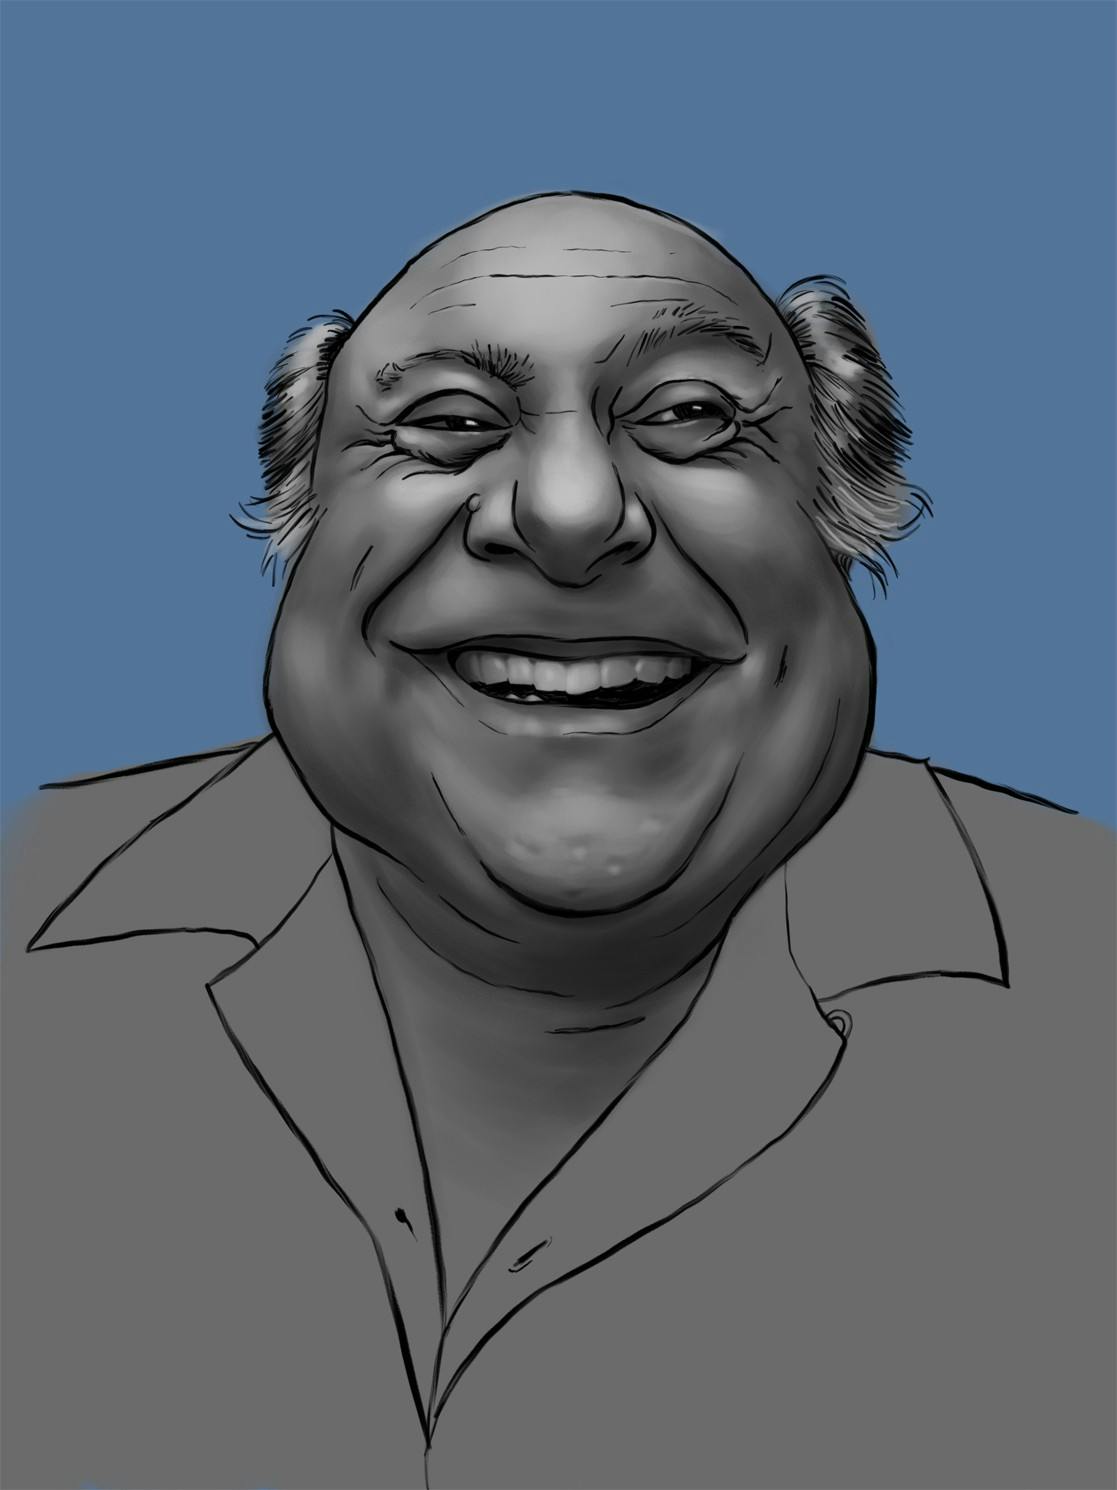 A mostly greyscale caricature of actor Danny DeVito smiling.